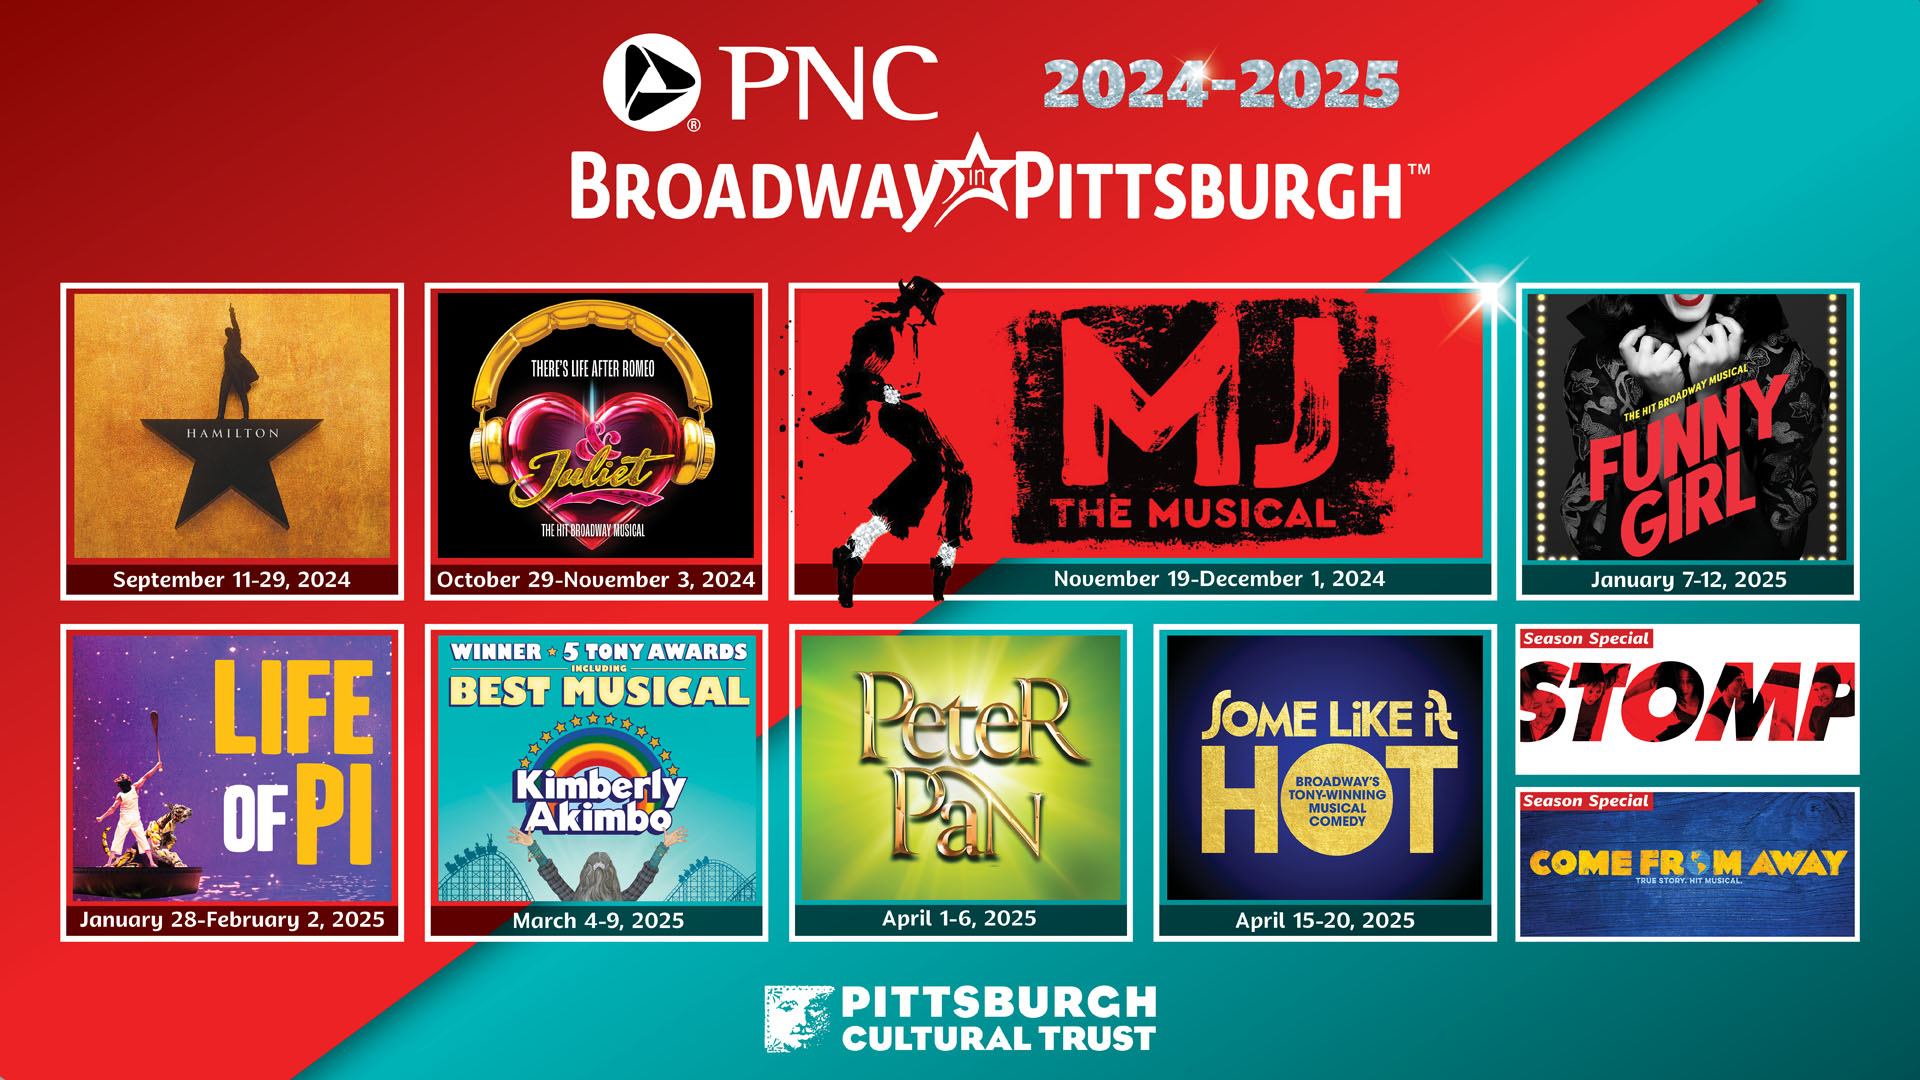 PNC Broadway in Pittsburgh season featuring Hamilton, & Juliet, MJ the Musical, Funny Girl, Life of Pi, Kimberly Akimbo, Peter Pan, Some Like It Hot